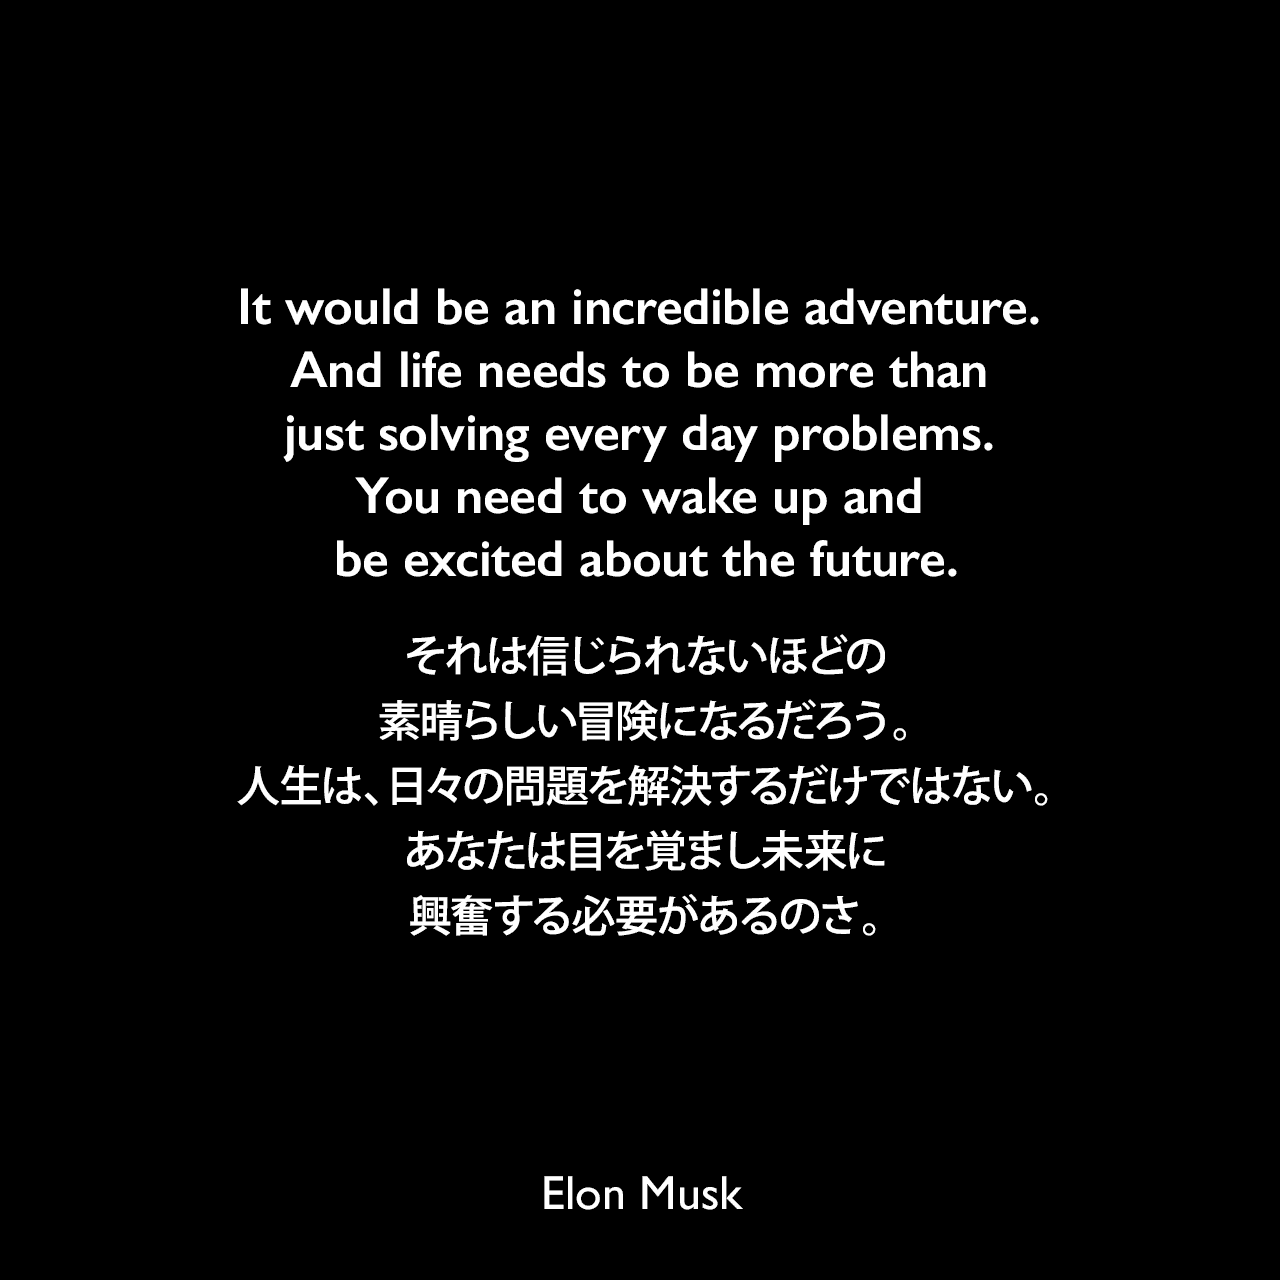 It would be an incredible adventure. And life needs to be more than just solving every day problems. You need to wake up and be excited about the future.それは信じられないほどの素晴らしい冒険になるだろう。人生は、日々の問題を解決するだけではない。あなたは目を覚まし未来に興奮する必要があるのさ。- IAC 2016会議で「持続可能な火星植民地化」についてのプレゼンテーションより